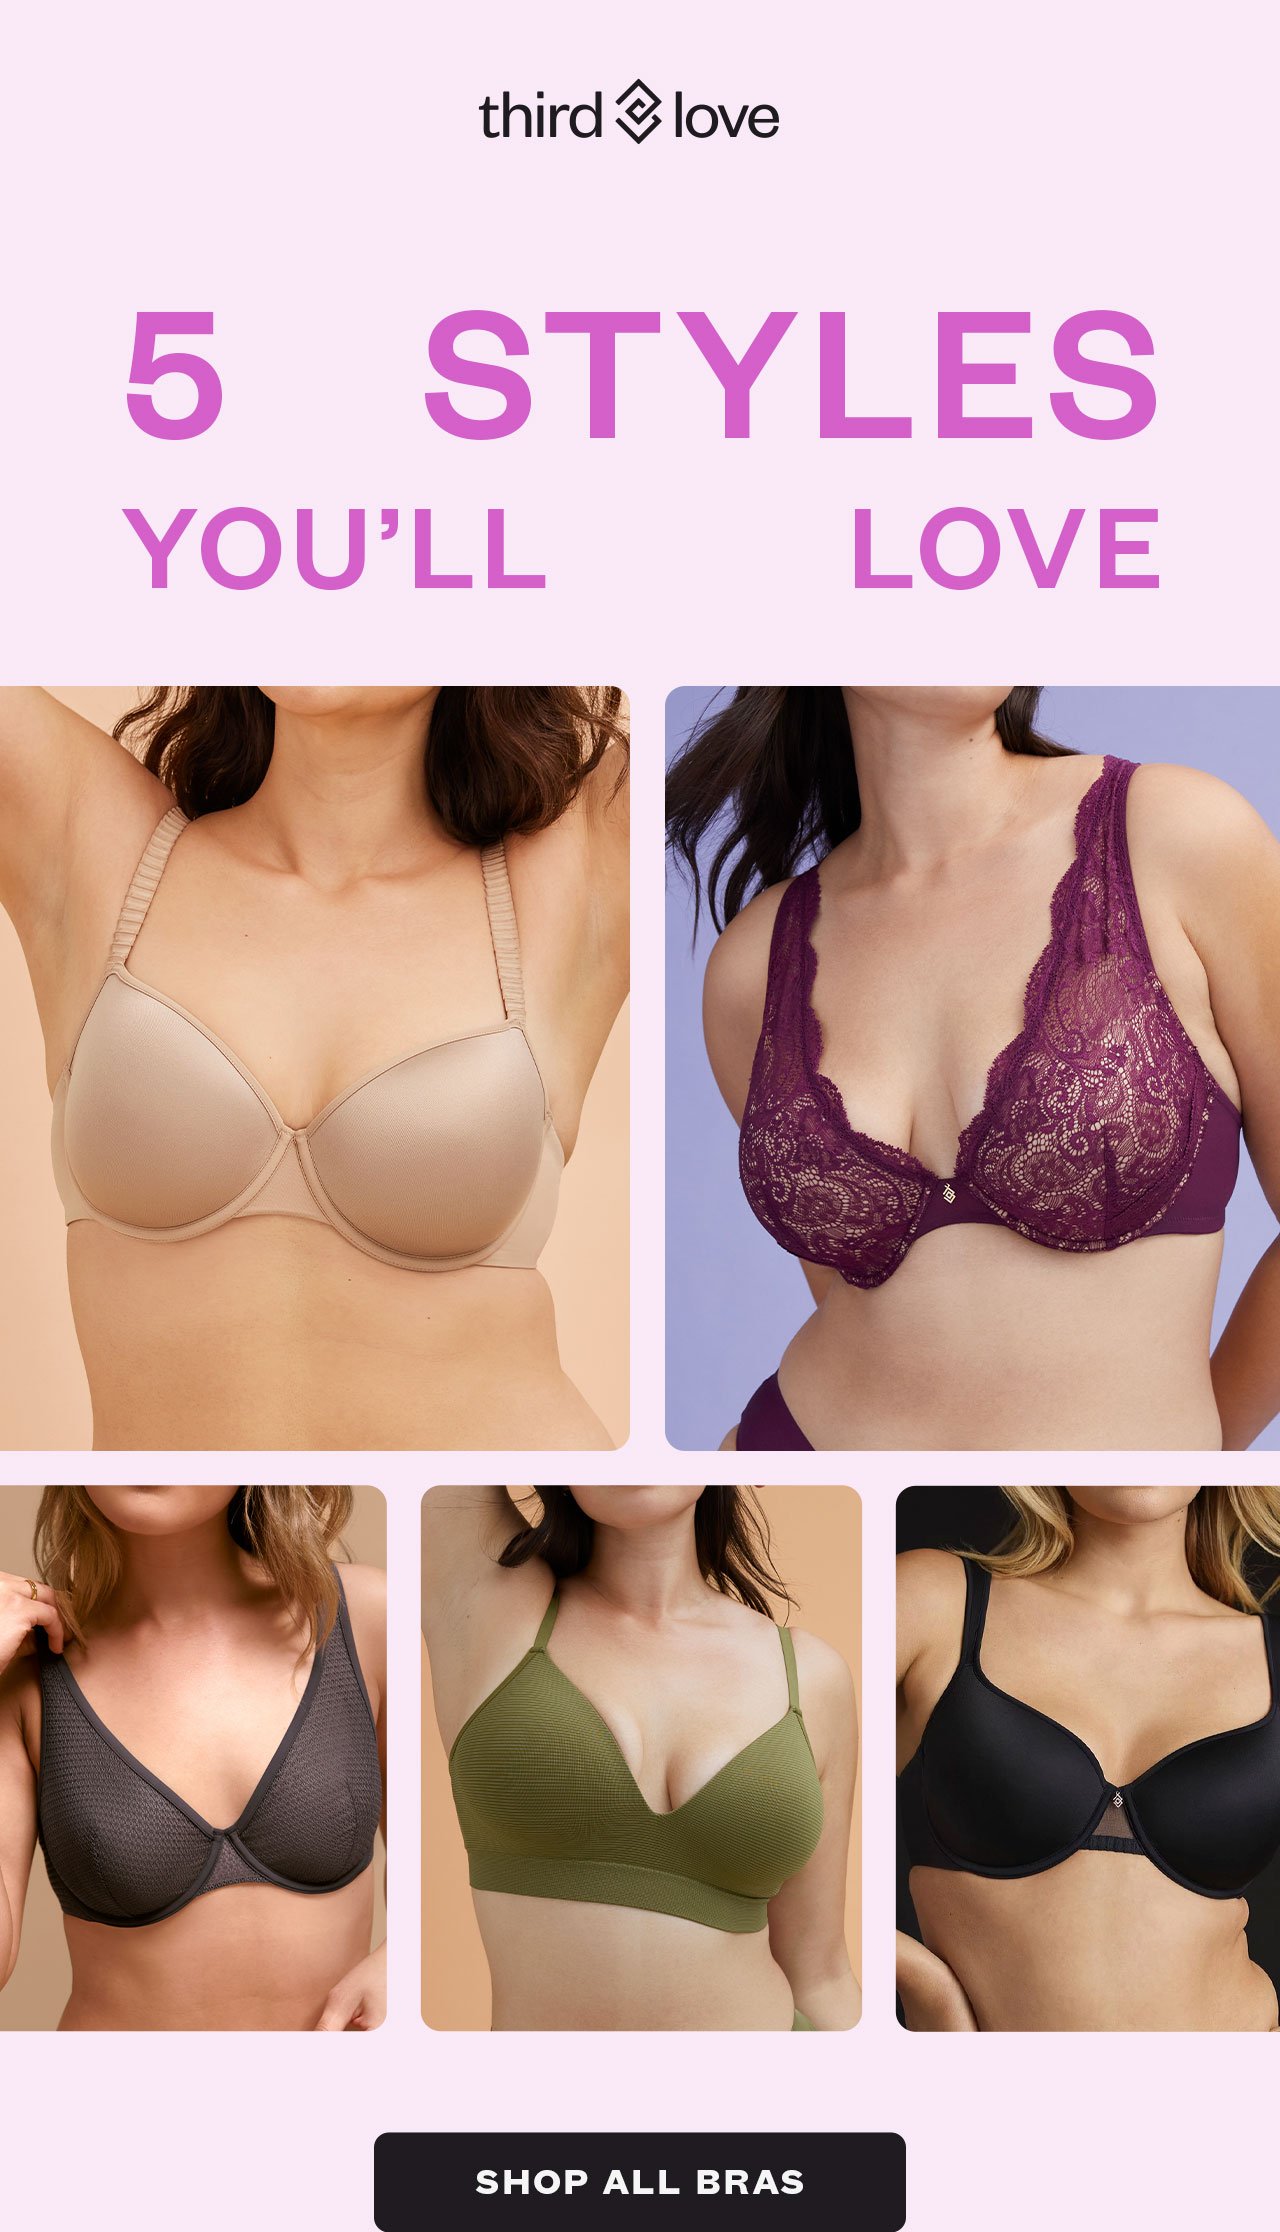 Third Love: 5 bras to make every outfit better